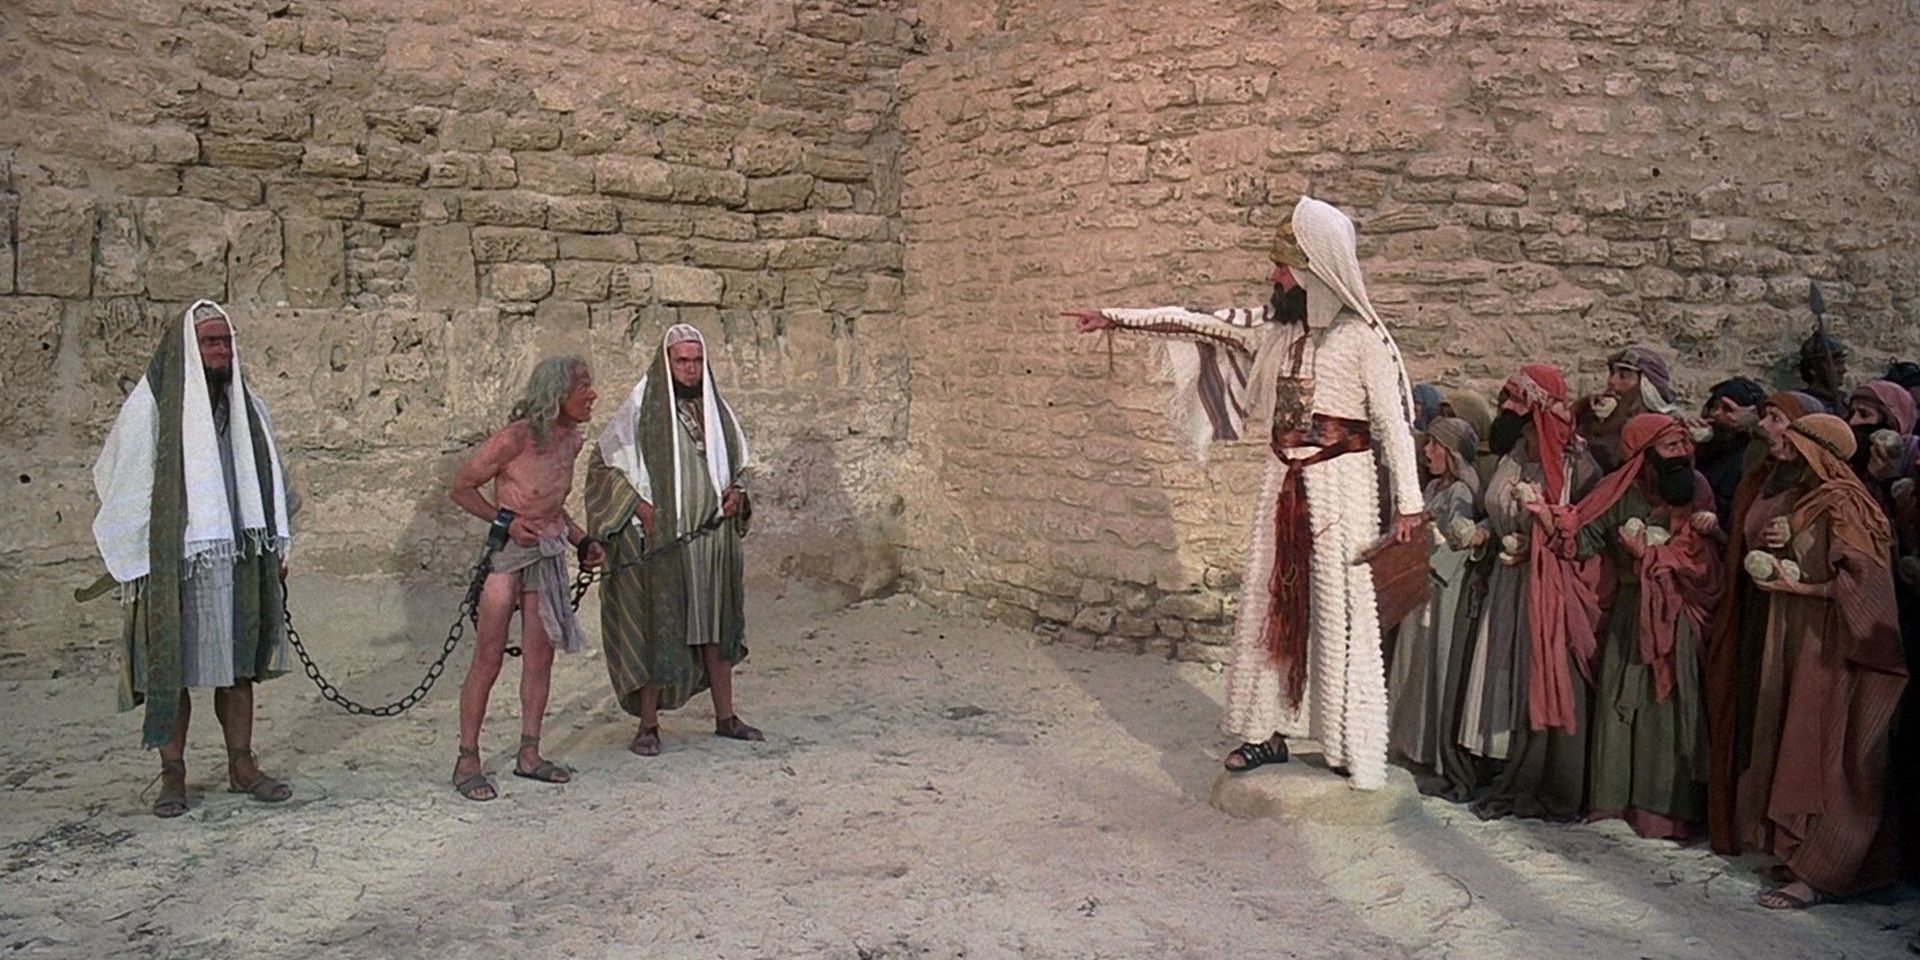 man being held in shackles in the stoning scene in Monty Python's Life of Brian